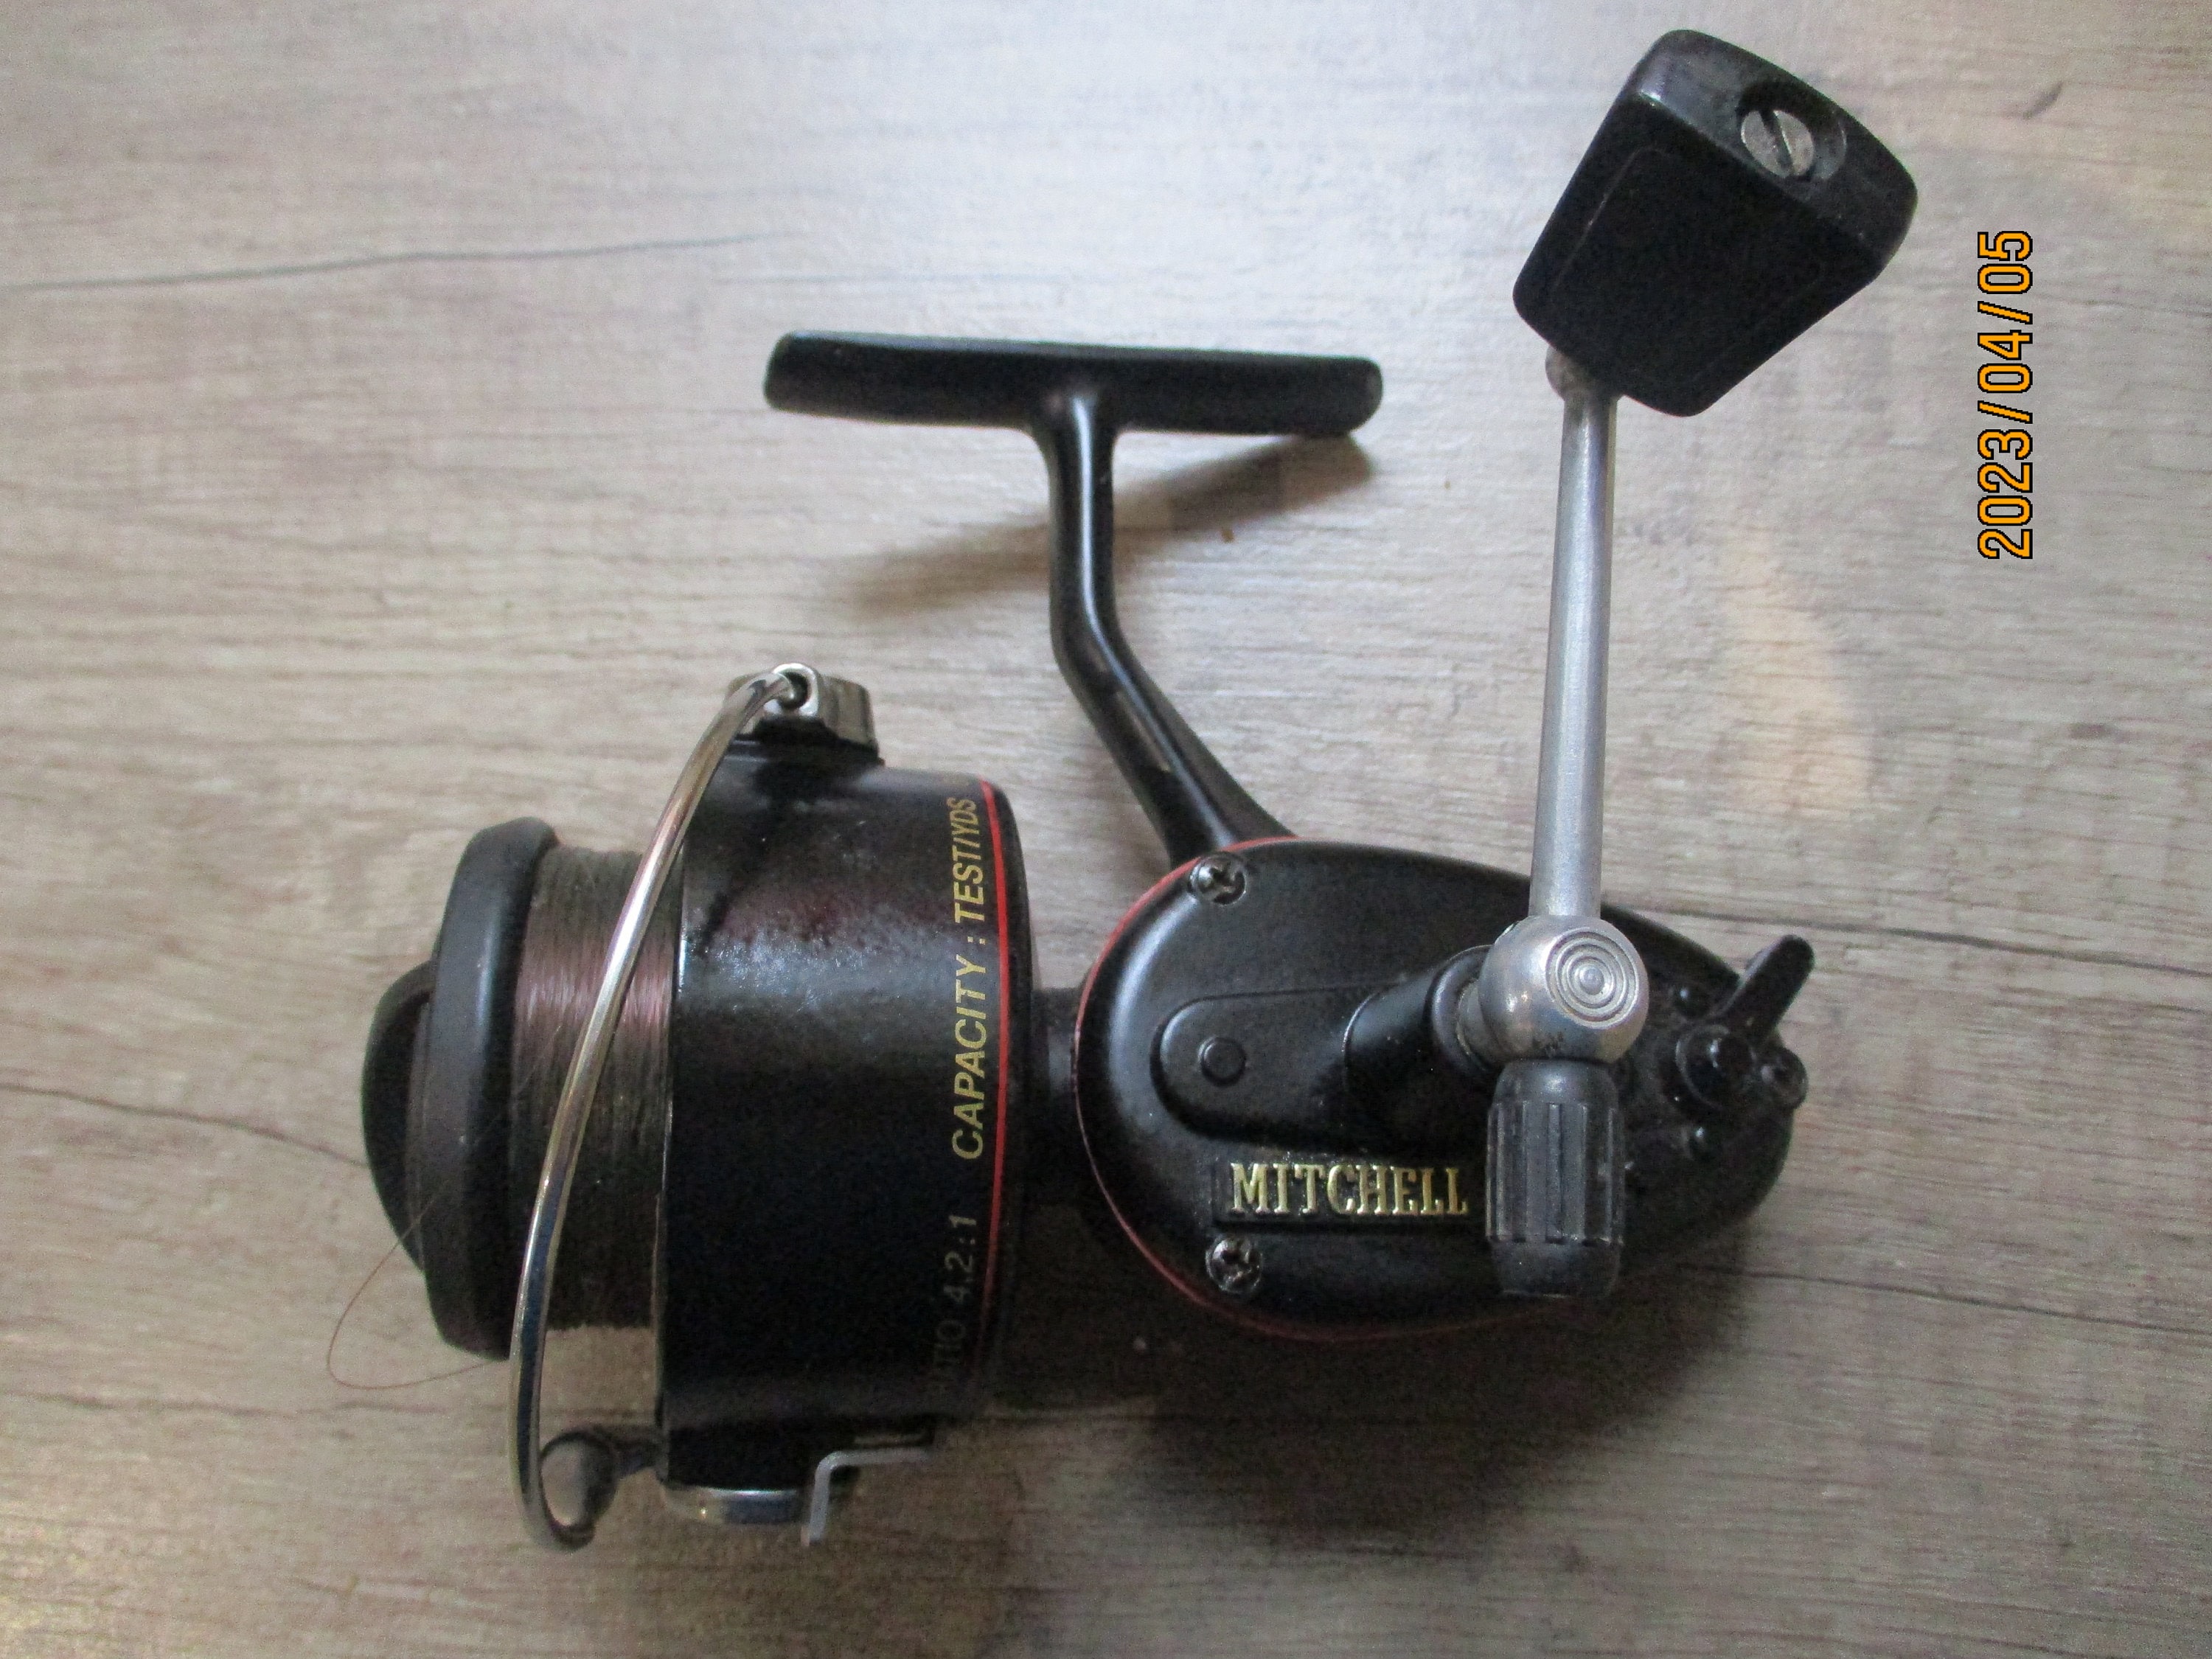 A Good Vintage Mitchell 300 Reel Made in Taiwan Post 1990 -  Israel